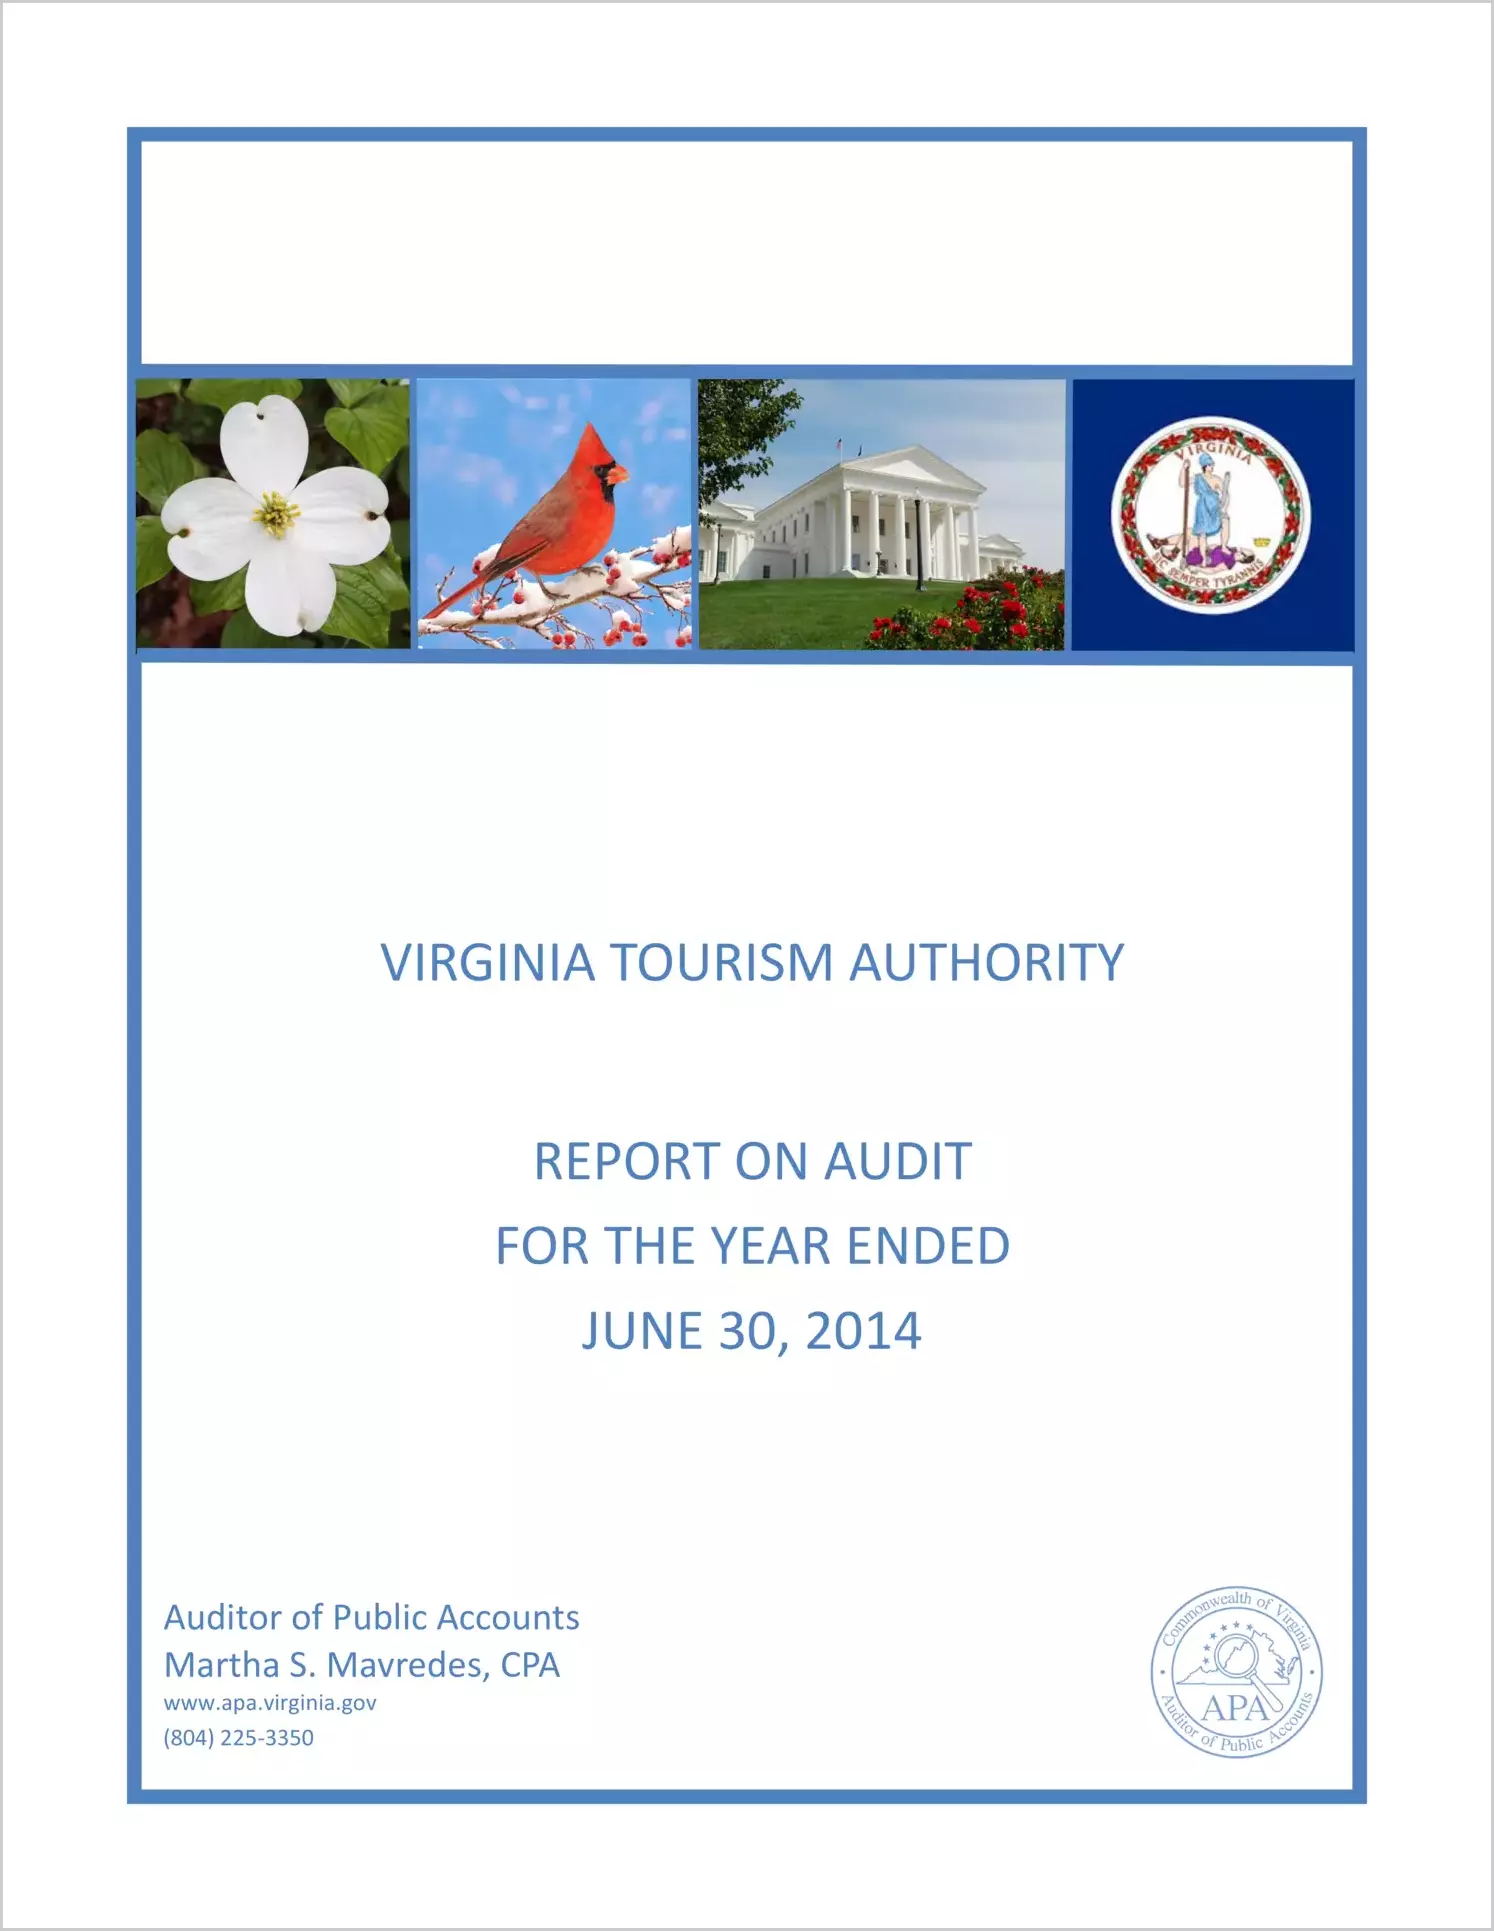 Virginia Tourism Authority for the year ended June 30, 2014